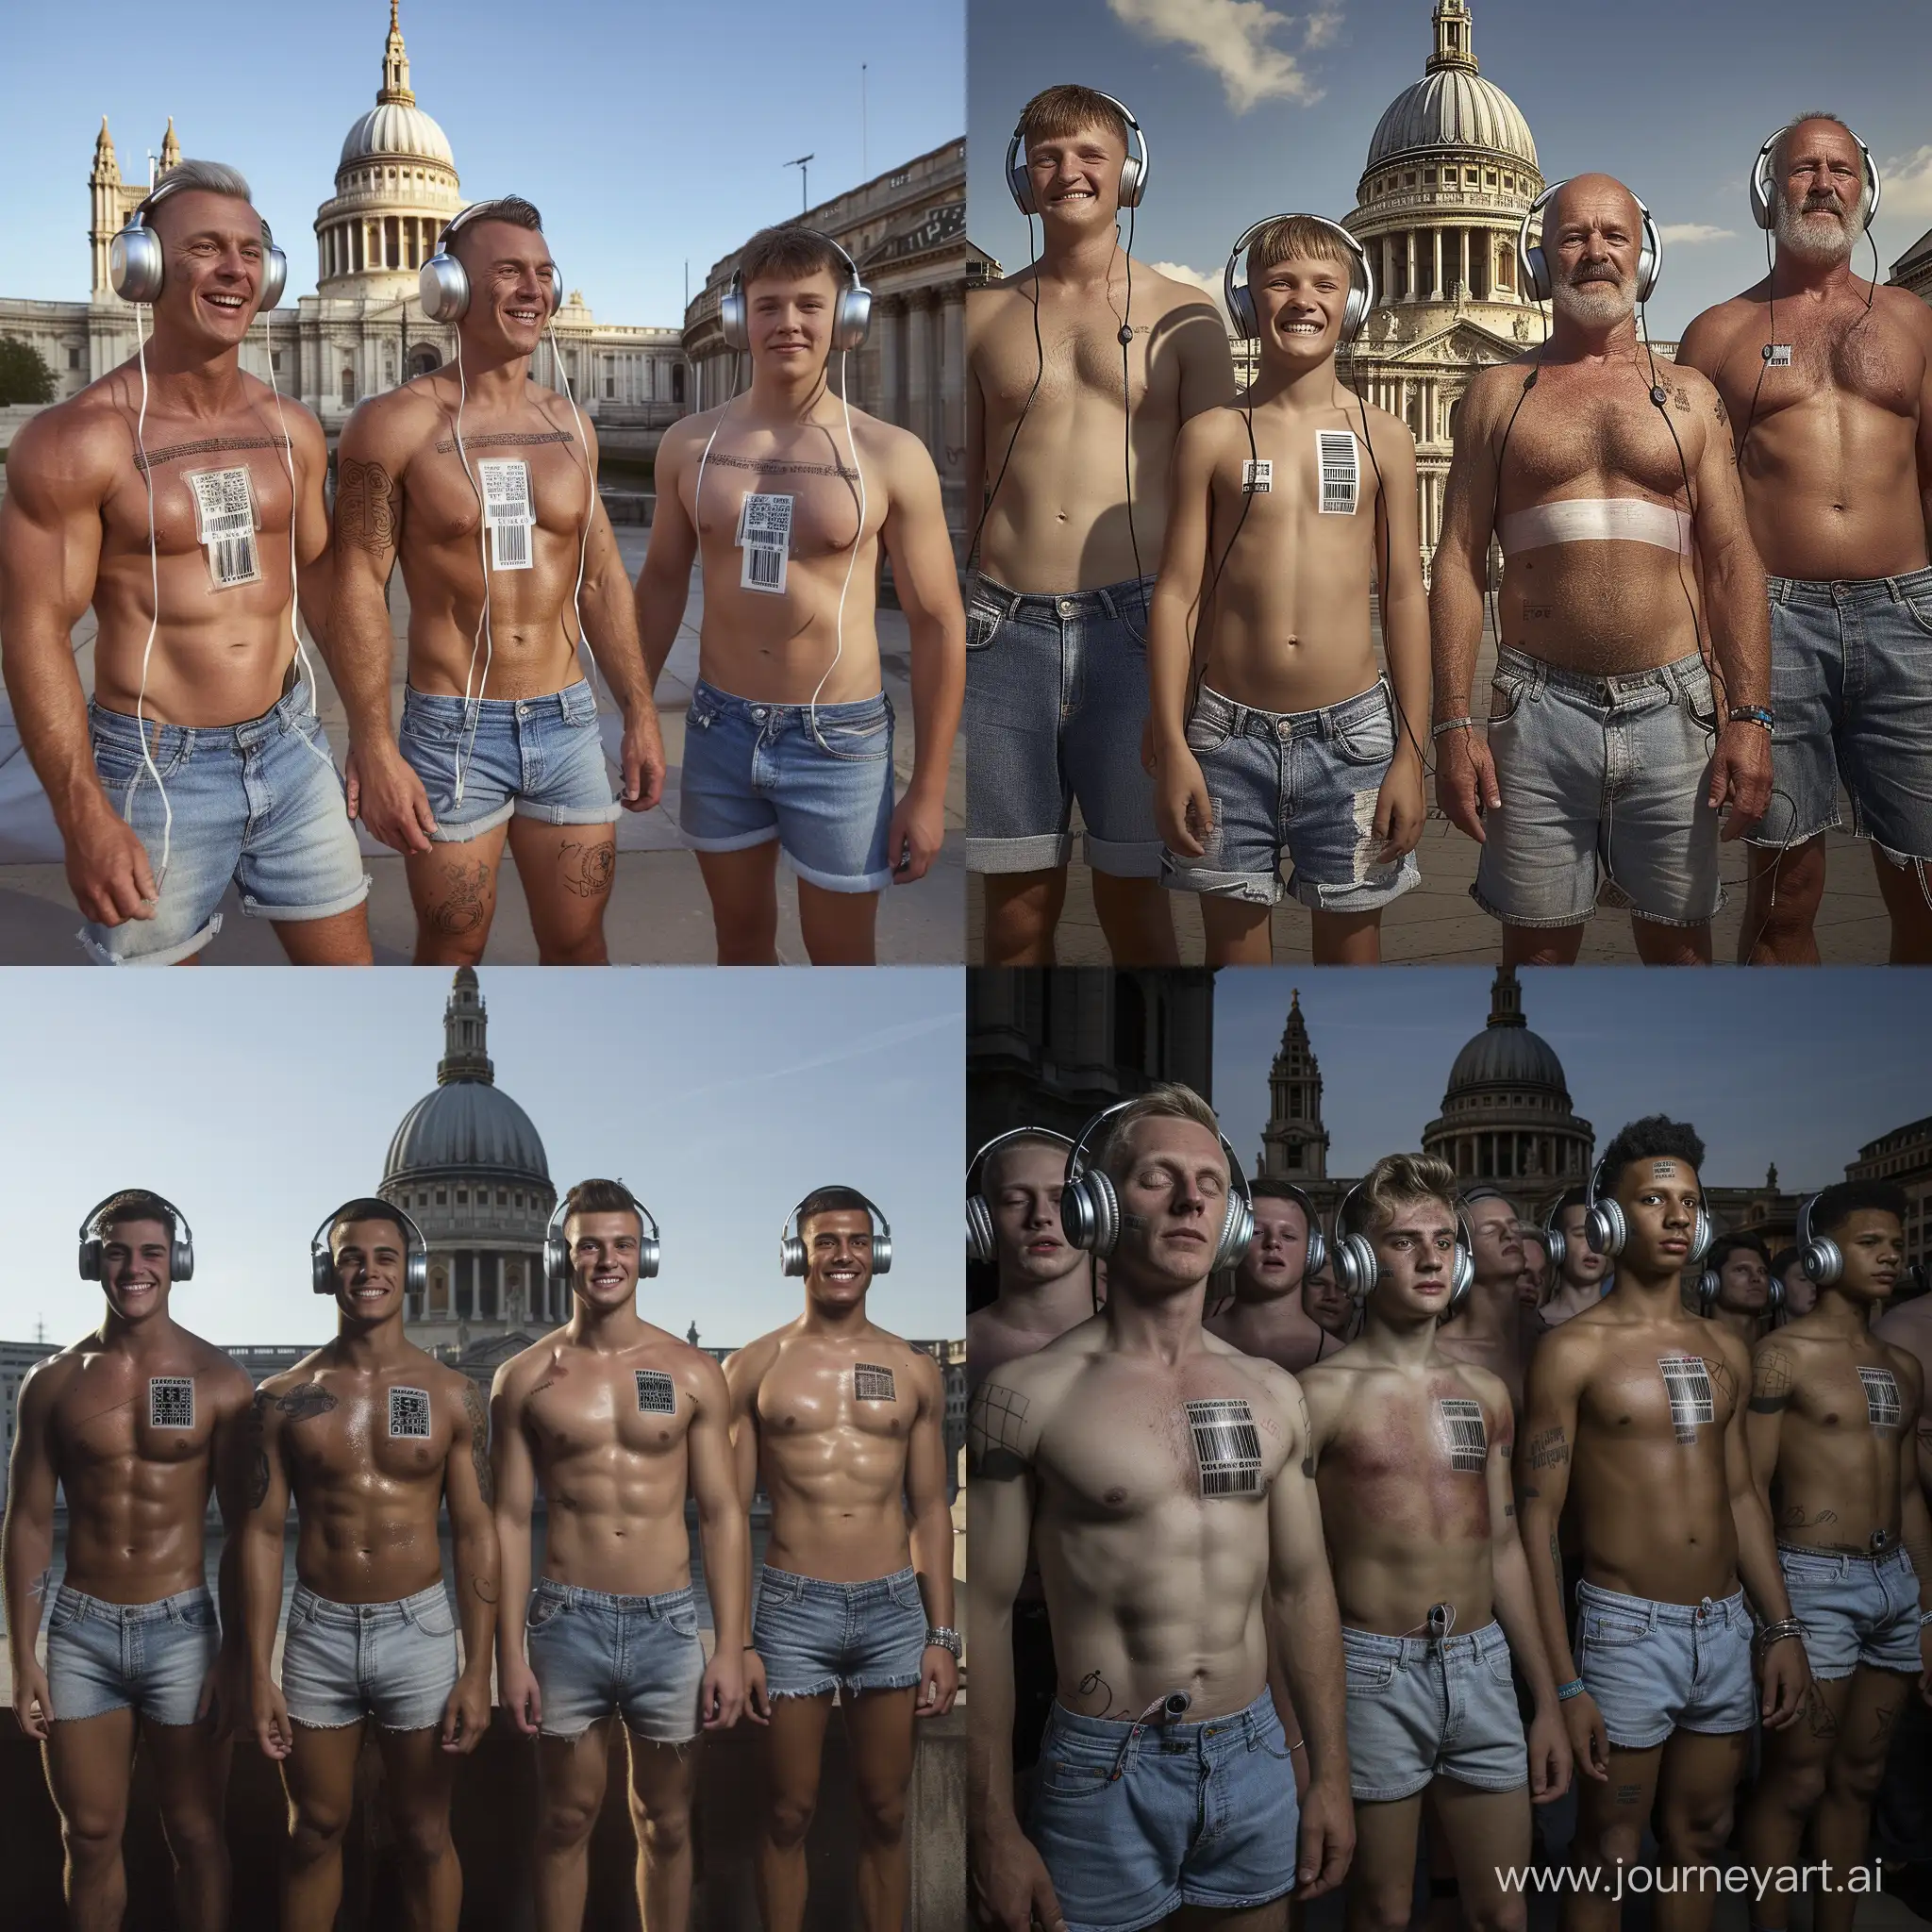 Handsome muscular middle-aged men and handsome muscular college-age boys each wear silver headphones and fitted denim cutoff shorts, dazed smiles, small barcode tattooed on each man's chest, Saint Paul's Cathedral setting, facing the viewer, mass indoctrination, hyperrealistic, cinematic